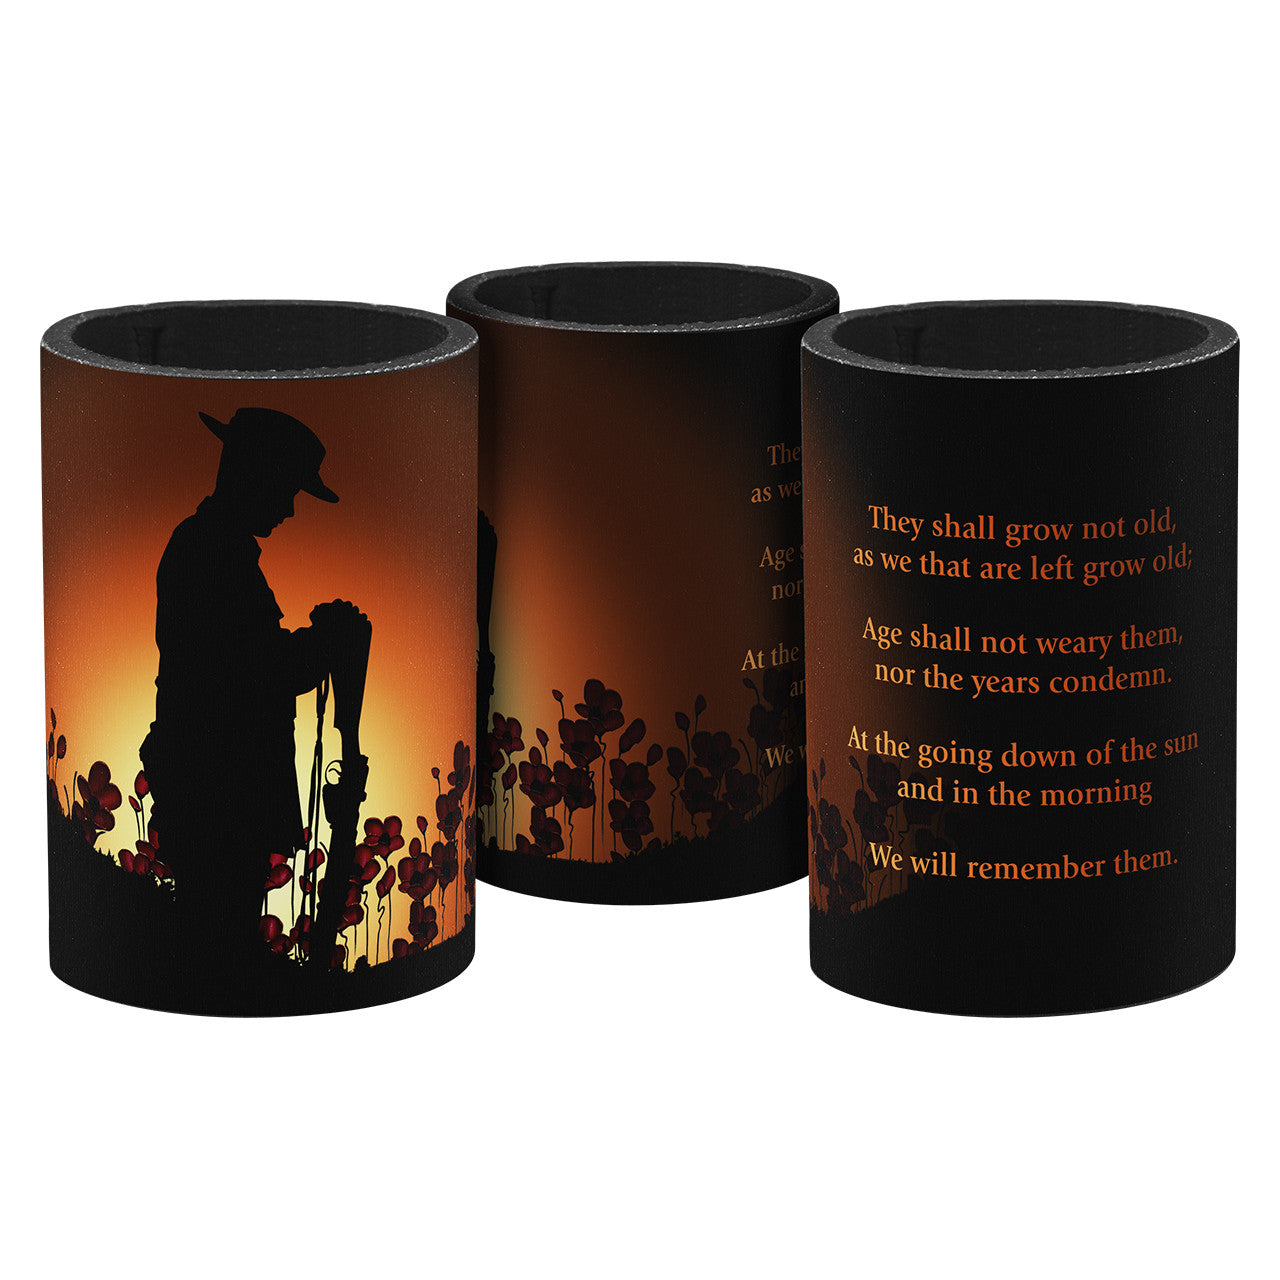 Introducing the Ode of Remembrance Drink Cooler, a truly captivating and poignant addition to your collection. This beautifully designed drink cooler features a silhouette soldier standing at reversed arms in a field of poppies, with the Ode of Remembrance inscribed on it. www.defenceqstore.com.au